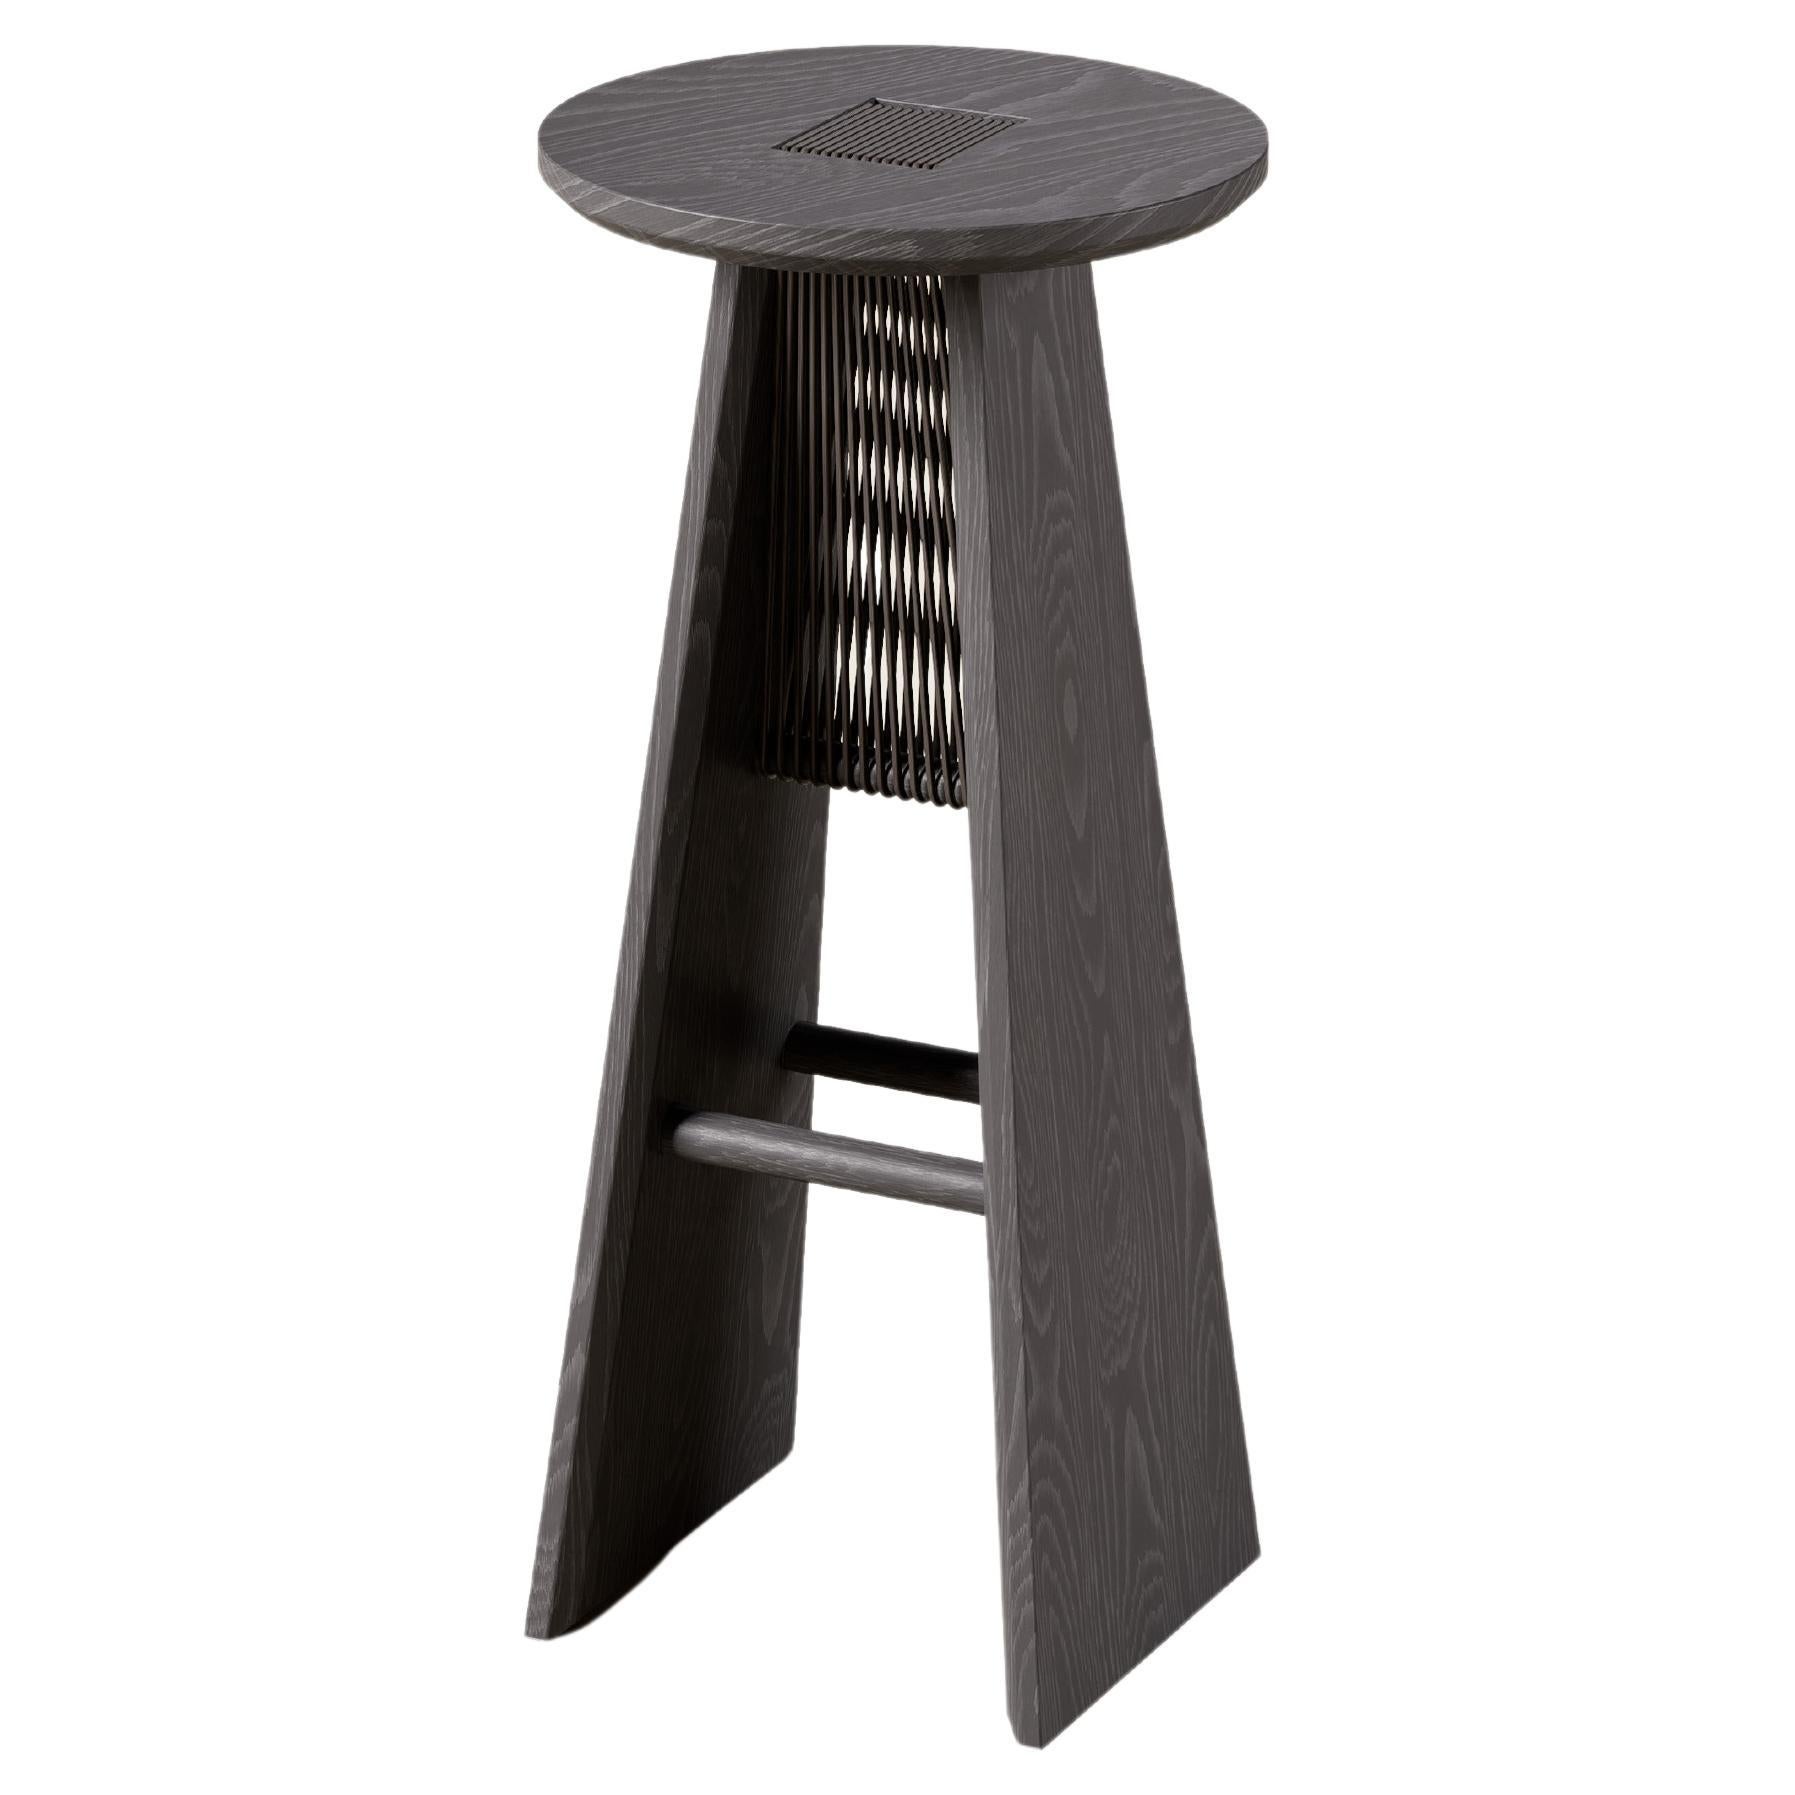 Contemporary Bar Stool Basurto 02 with Leather details